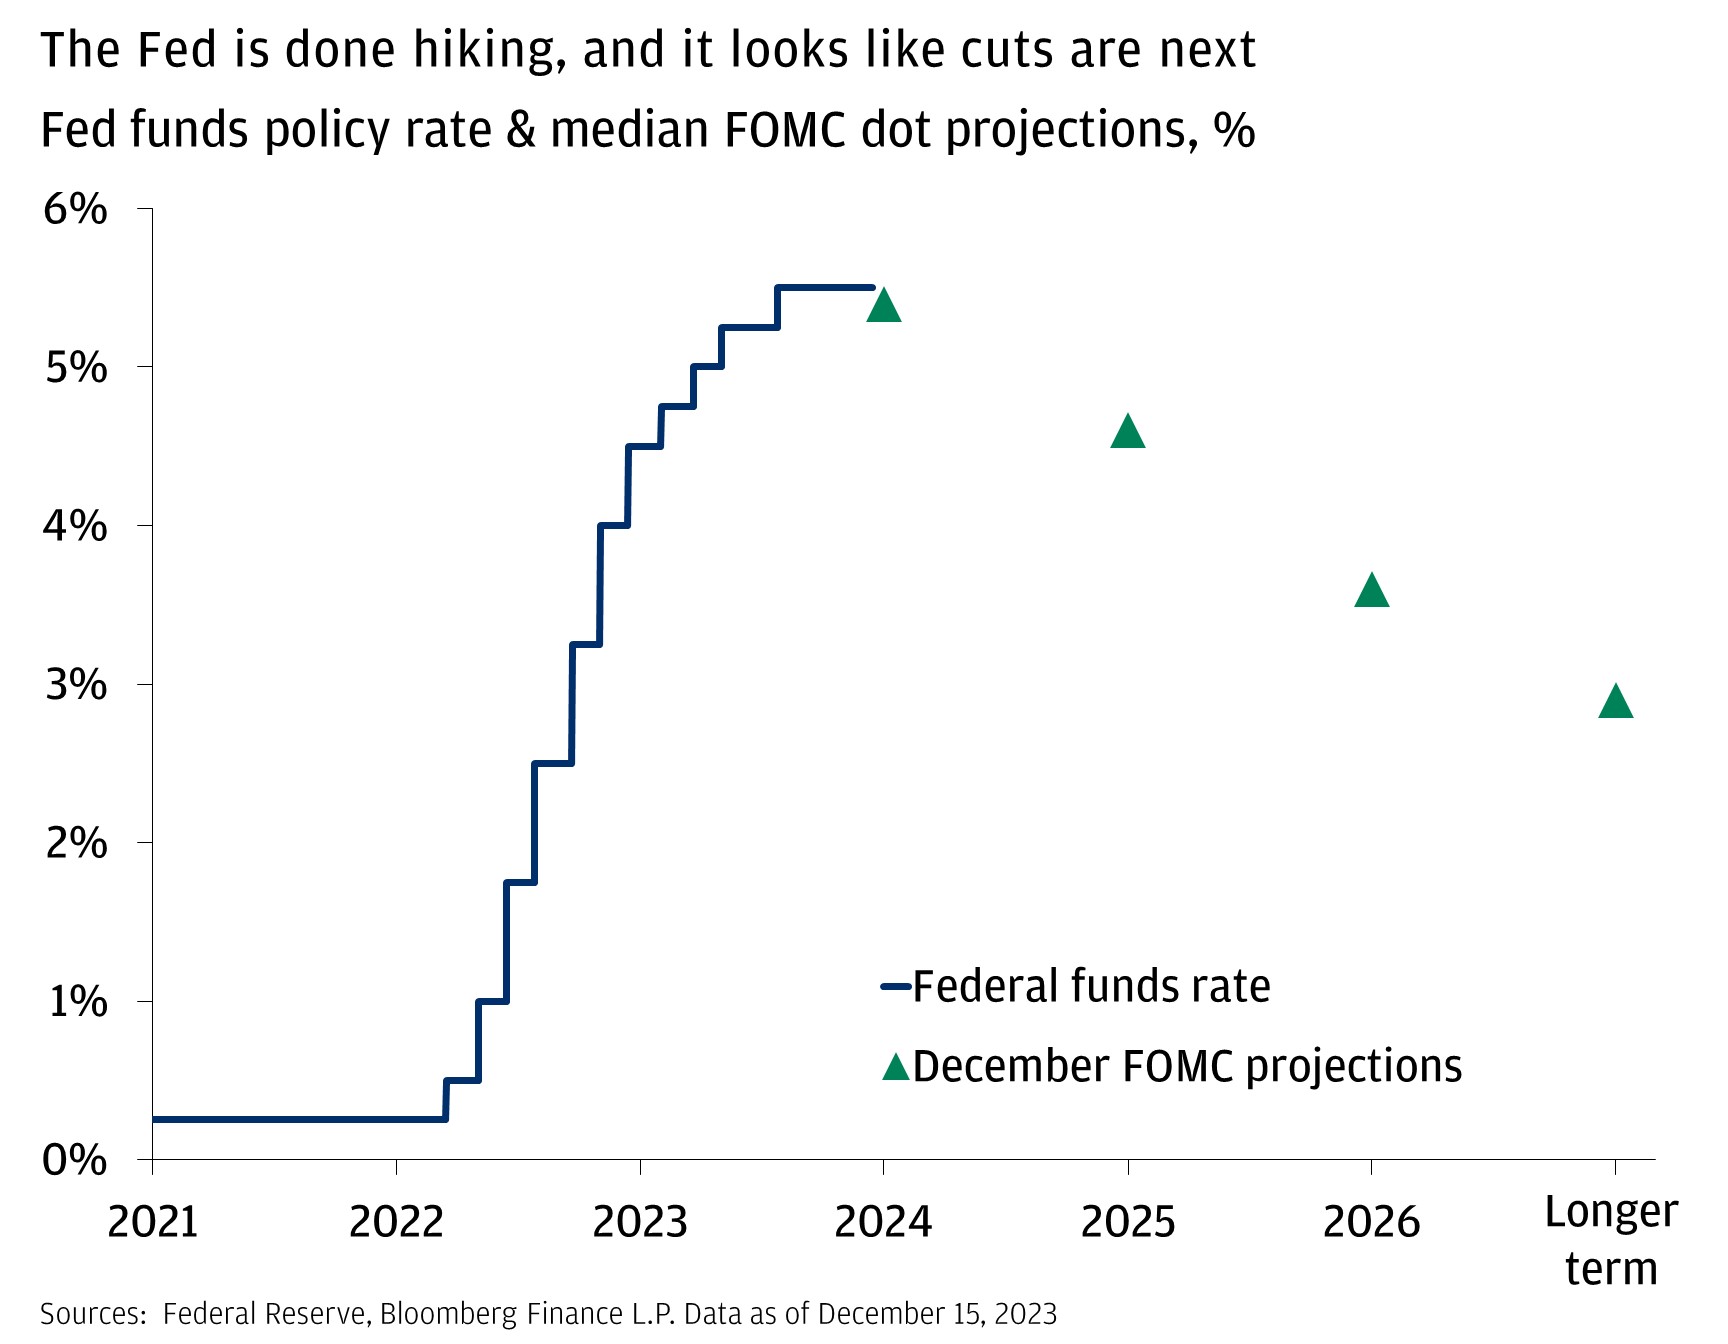 This graph shows the Fed funds policy rate and the median FOMC dot projections since Jan 2021 as of December 14, 2023.